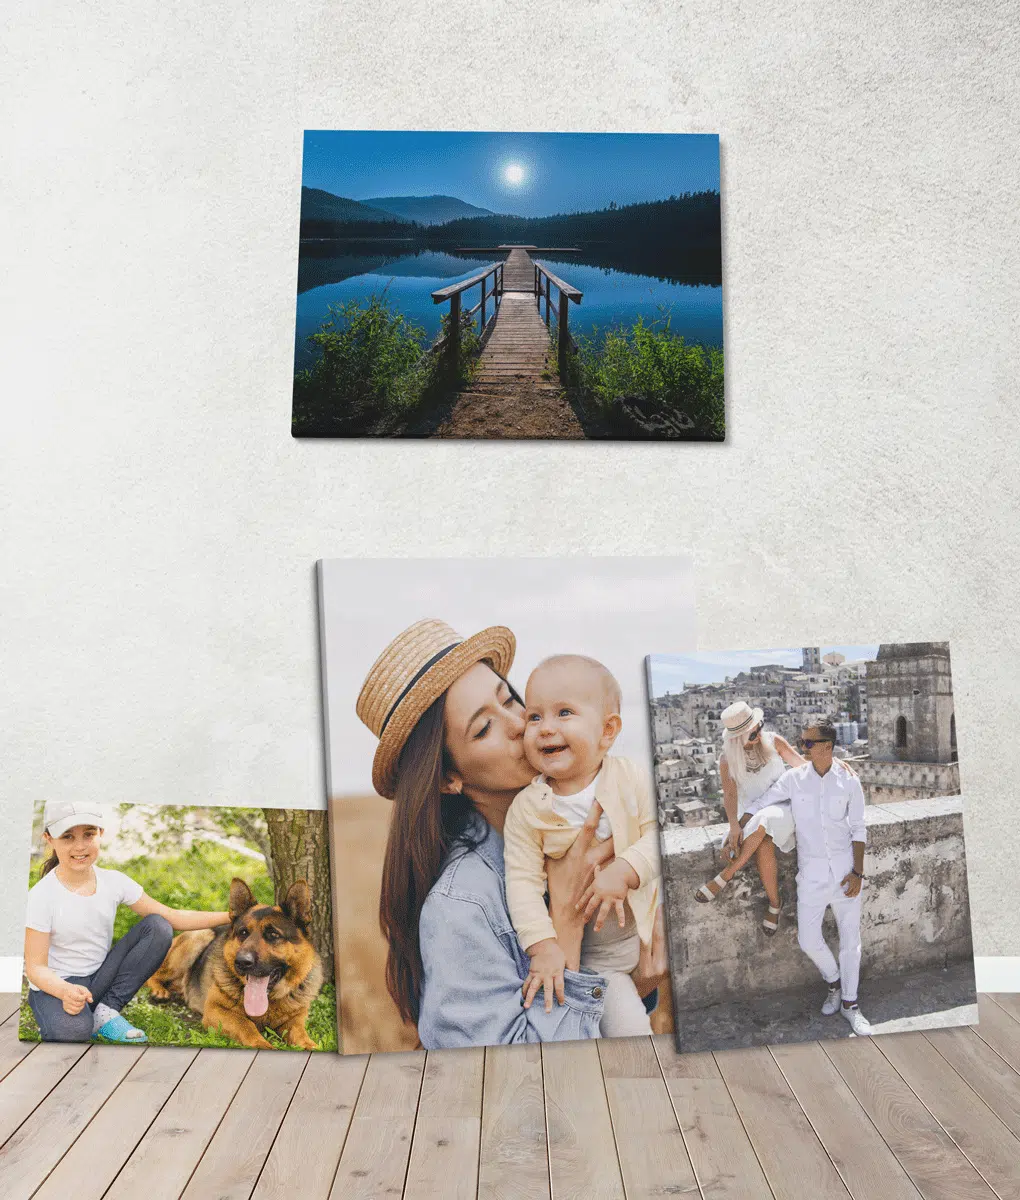 BFF – Personalised Photo Collage – Best Friend Gift Gifts For Friends